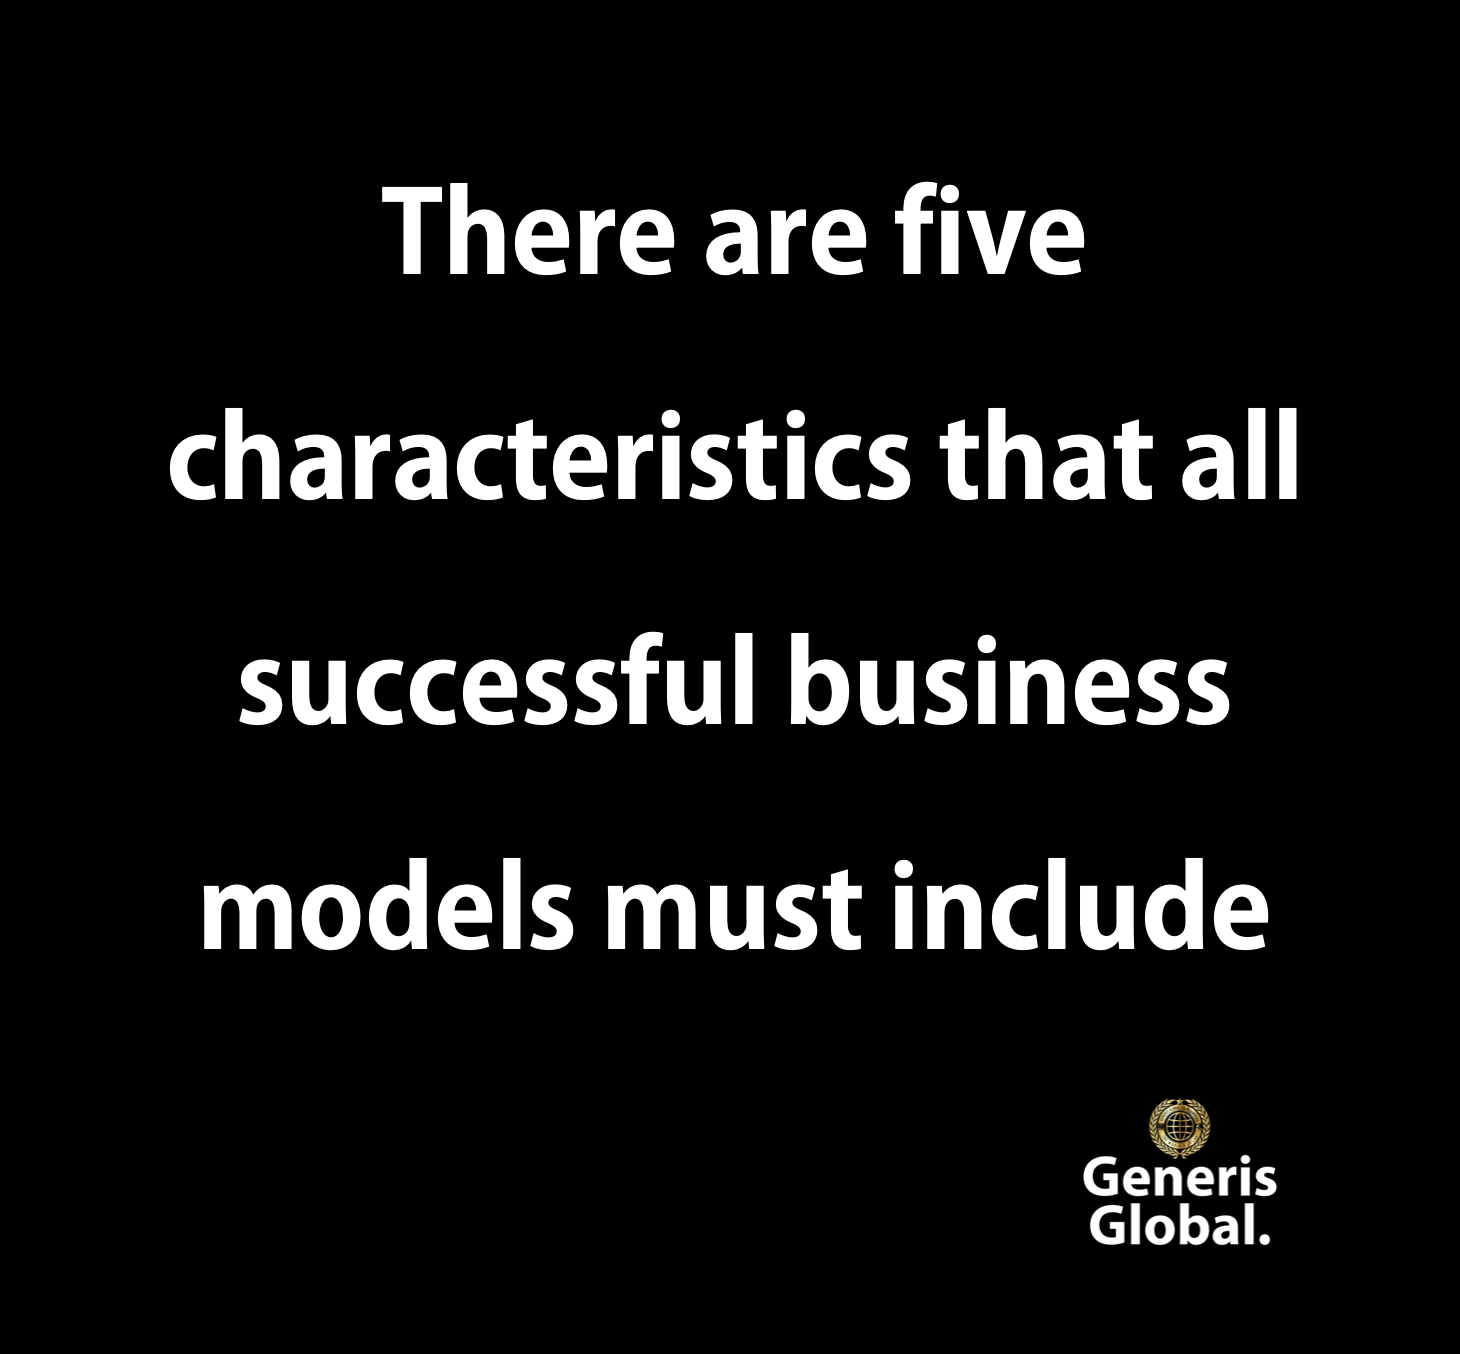 There are five characteristics that all successful business models must include